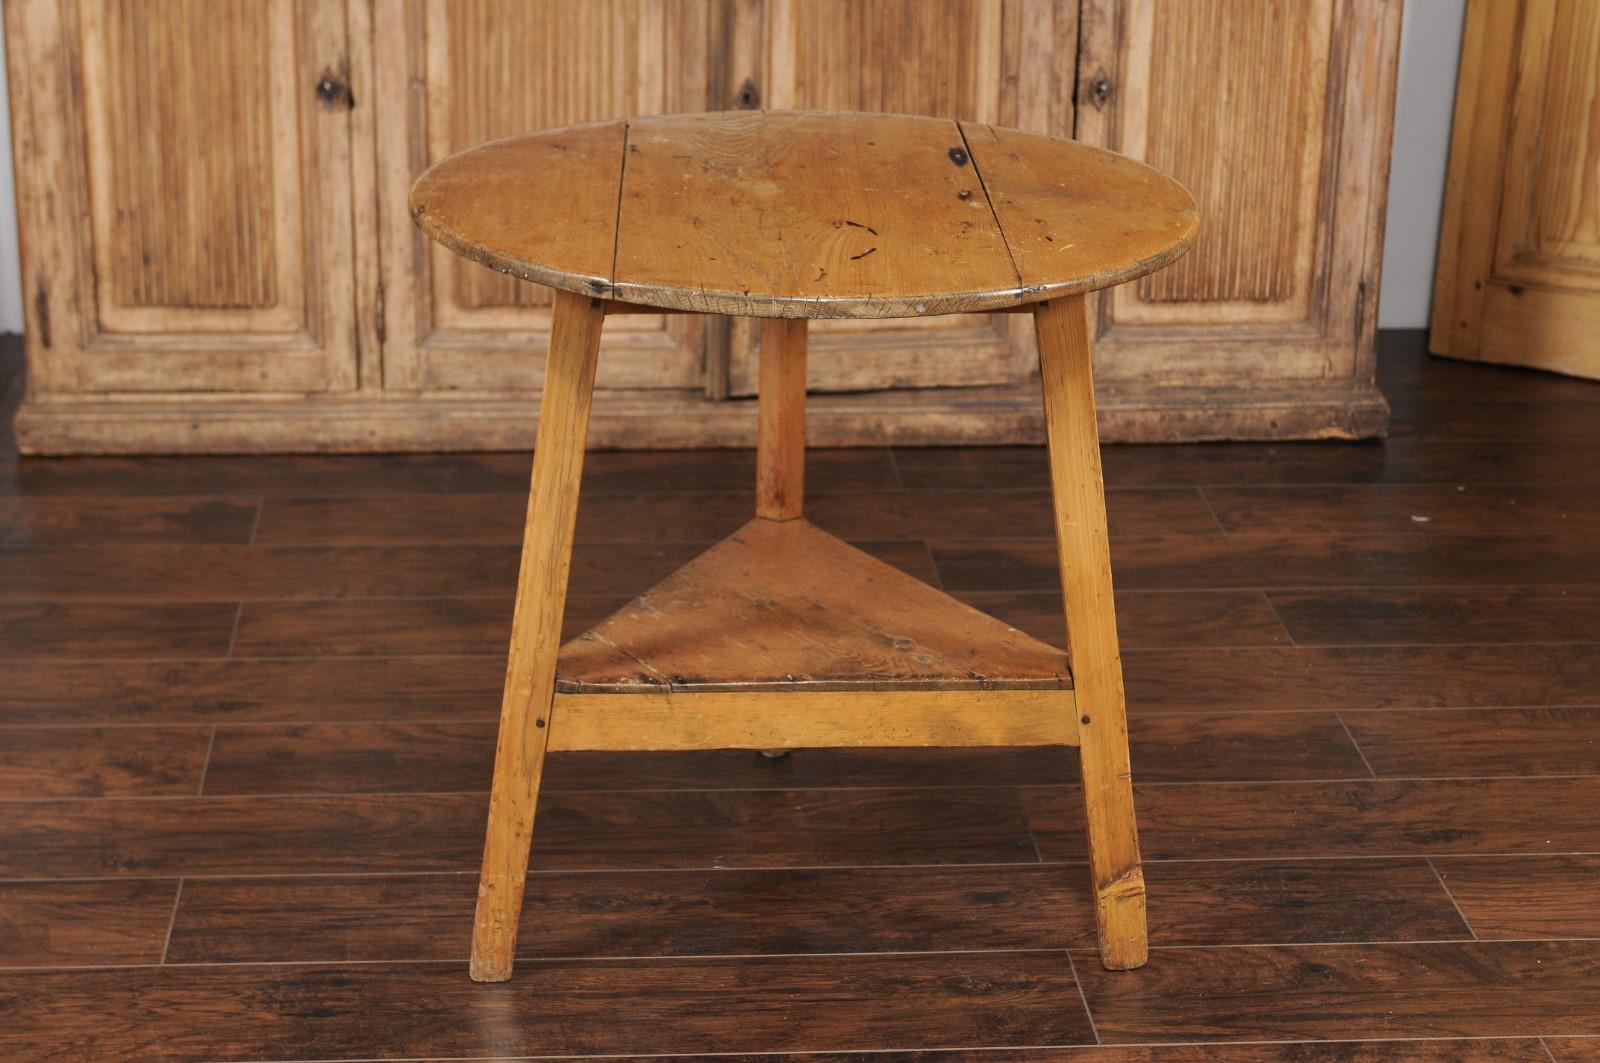 An English pine cricket table from the late 19th century, with circular top, blond finish and lower triangular shelf. Born in England in the last quarter of the 19th century, this cricket table features a circular planked top, resting upon a